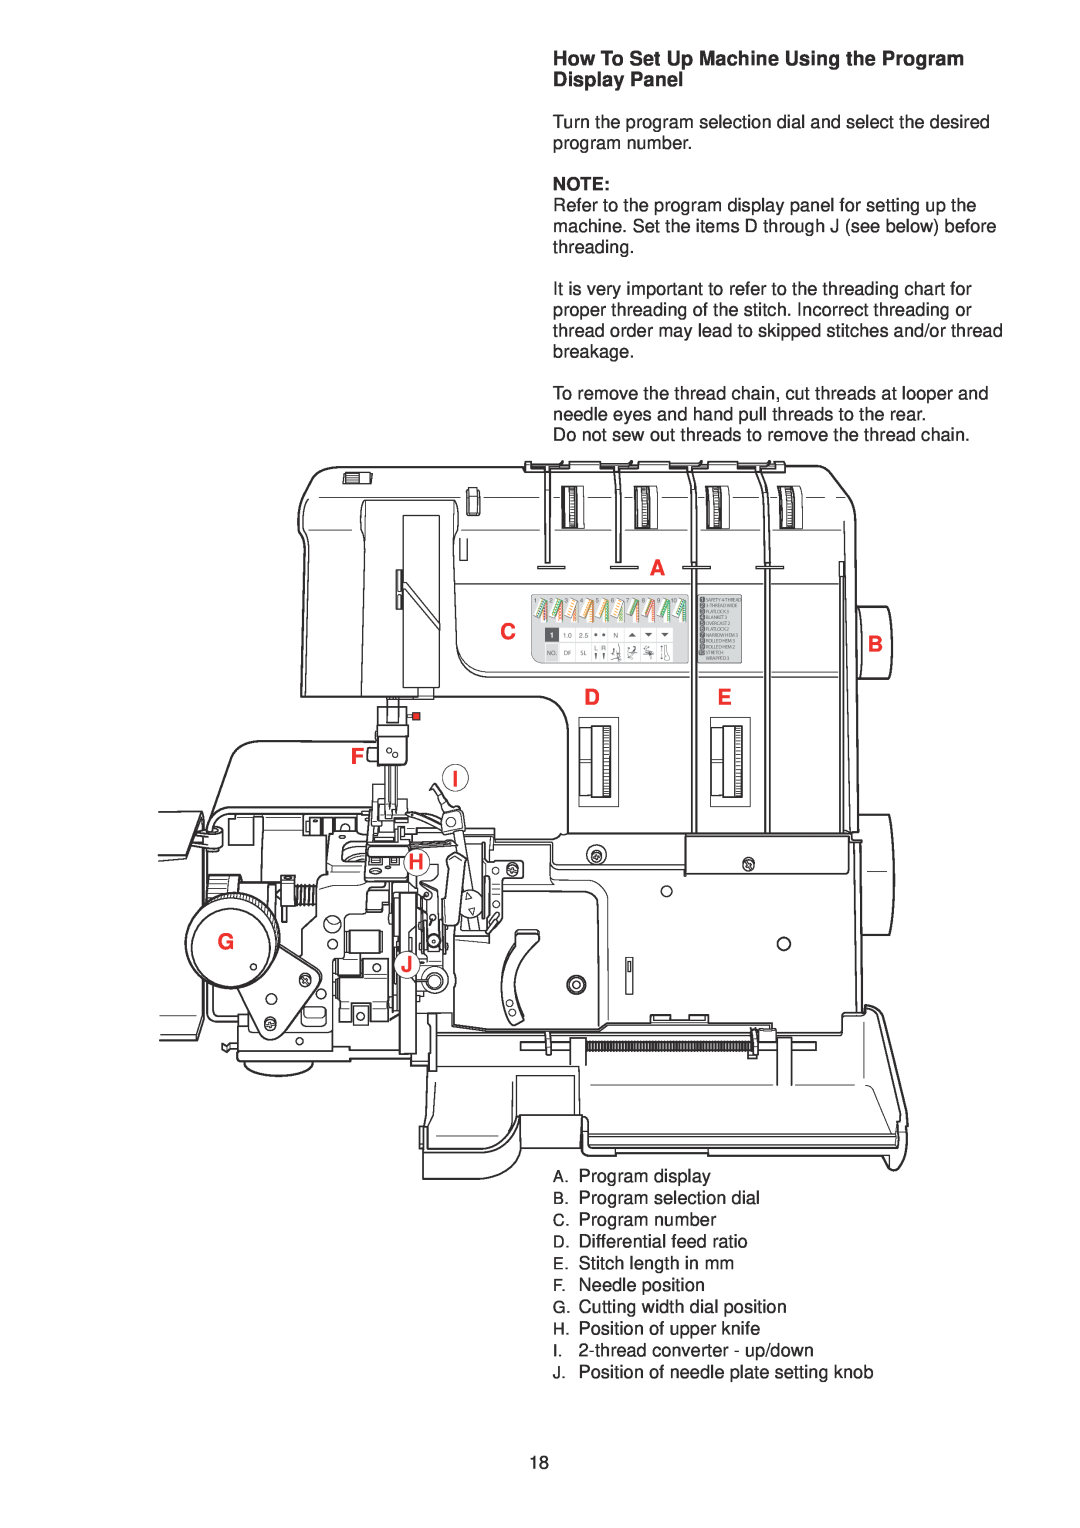 Janome 1100D Professional manual How To Set Up Machine Using the Program Display Panel, C F I H G J 